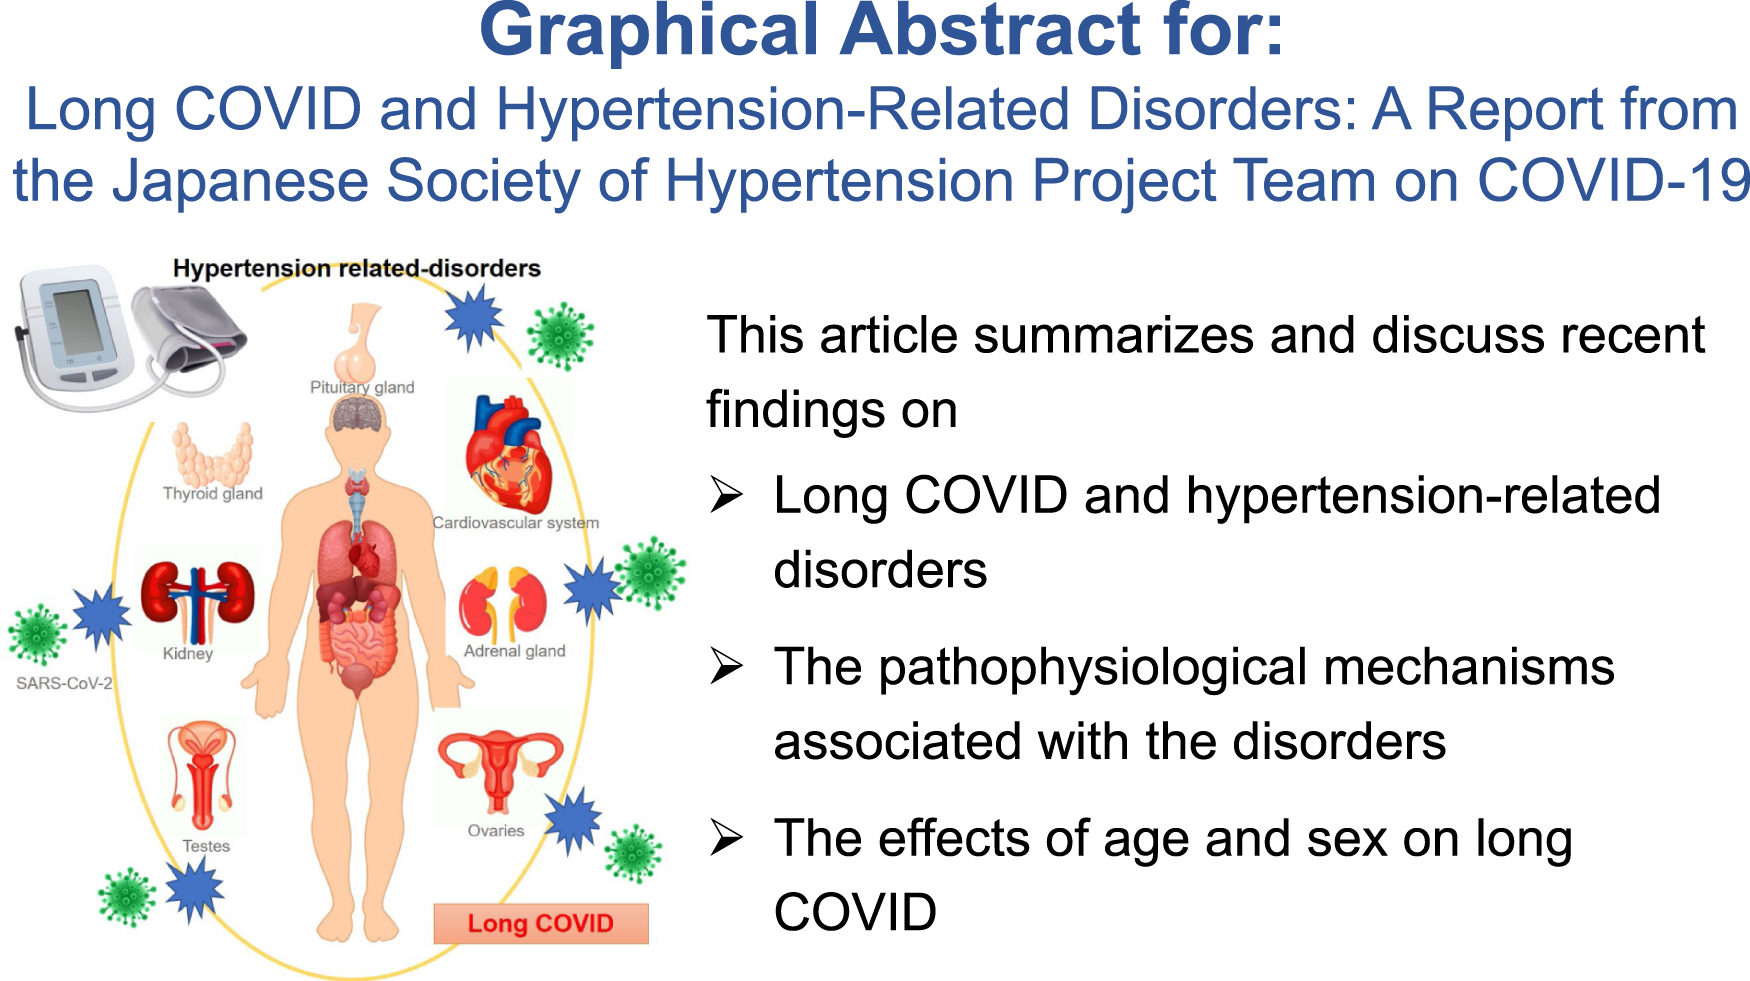 Long COVID and hypertension-related disorders a report from the Japanese Society of Hypertension Project Team on COVID-19 Hypertension Research pic pic